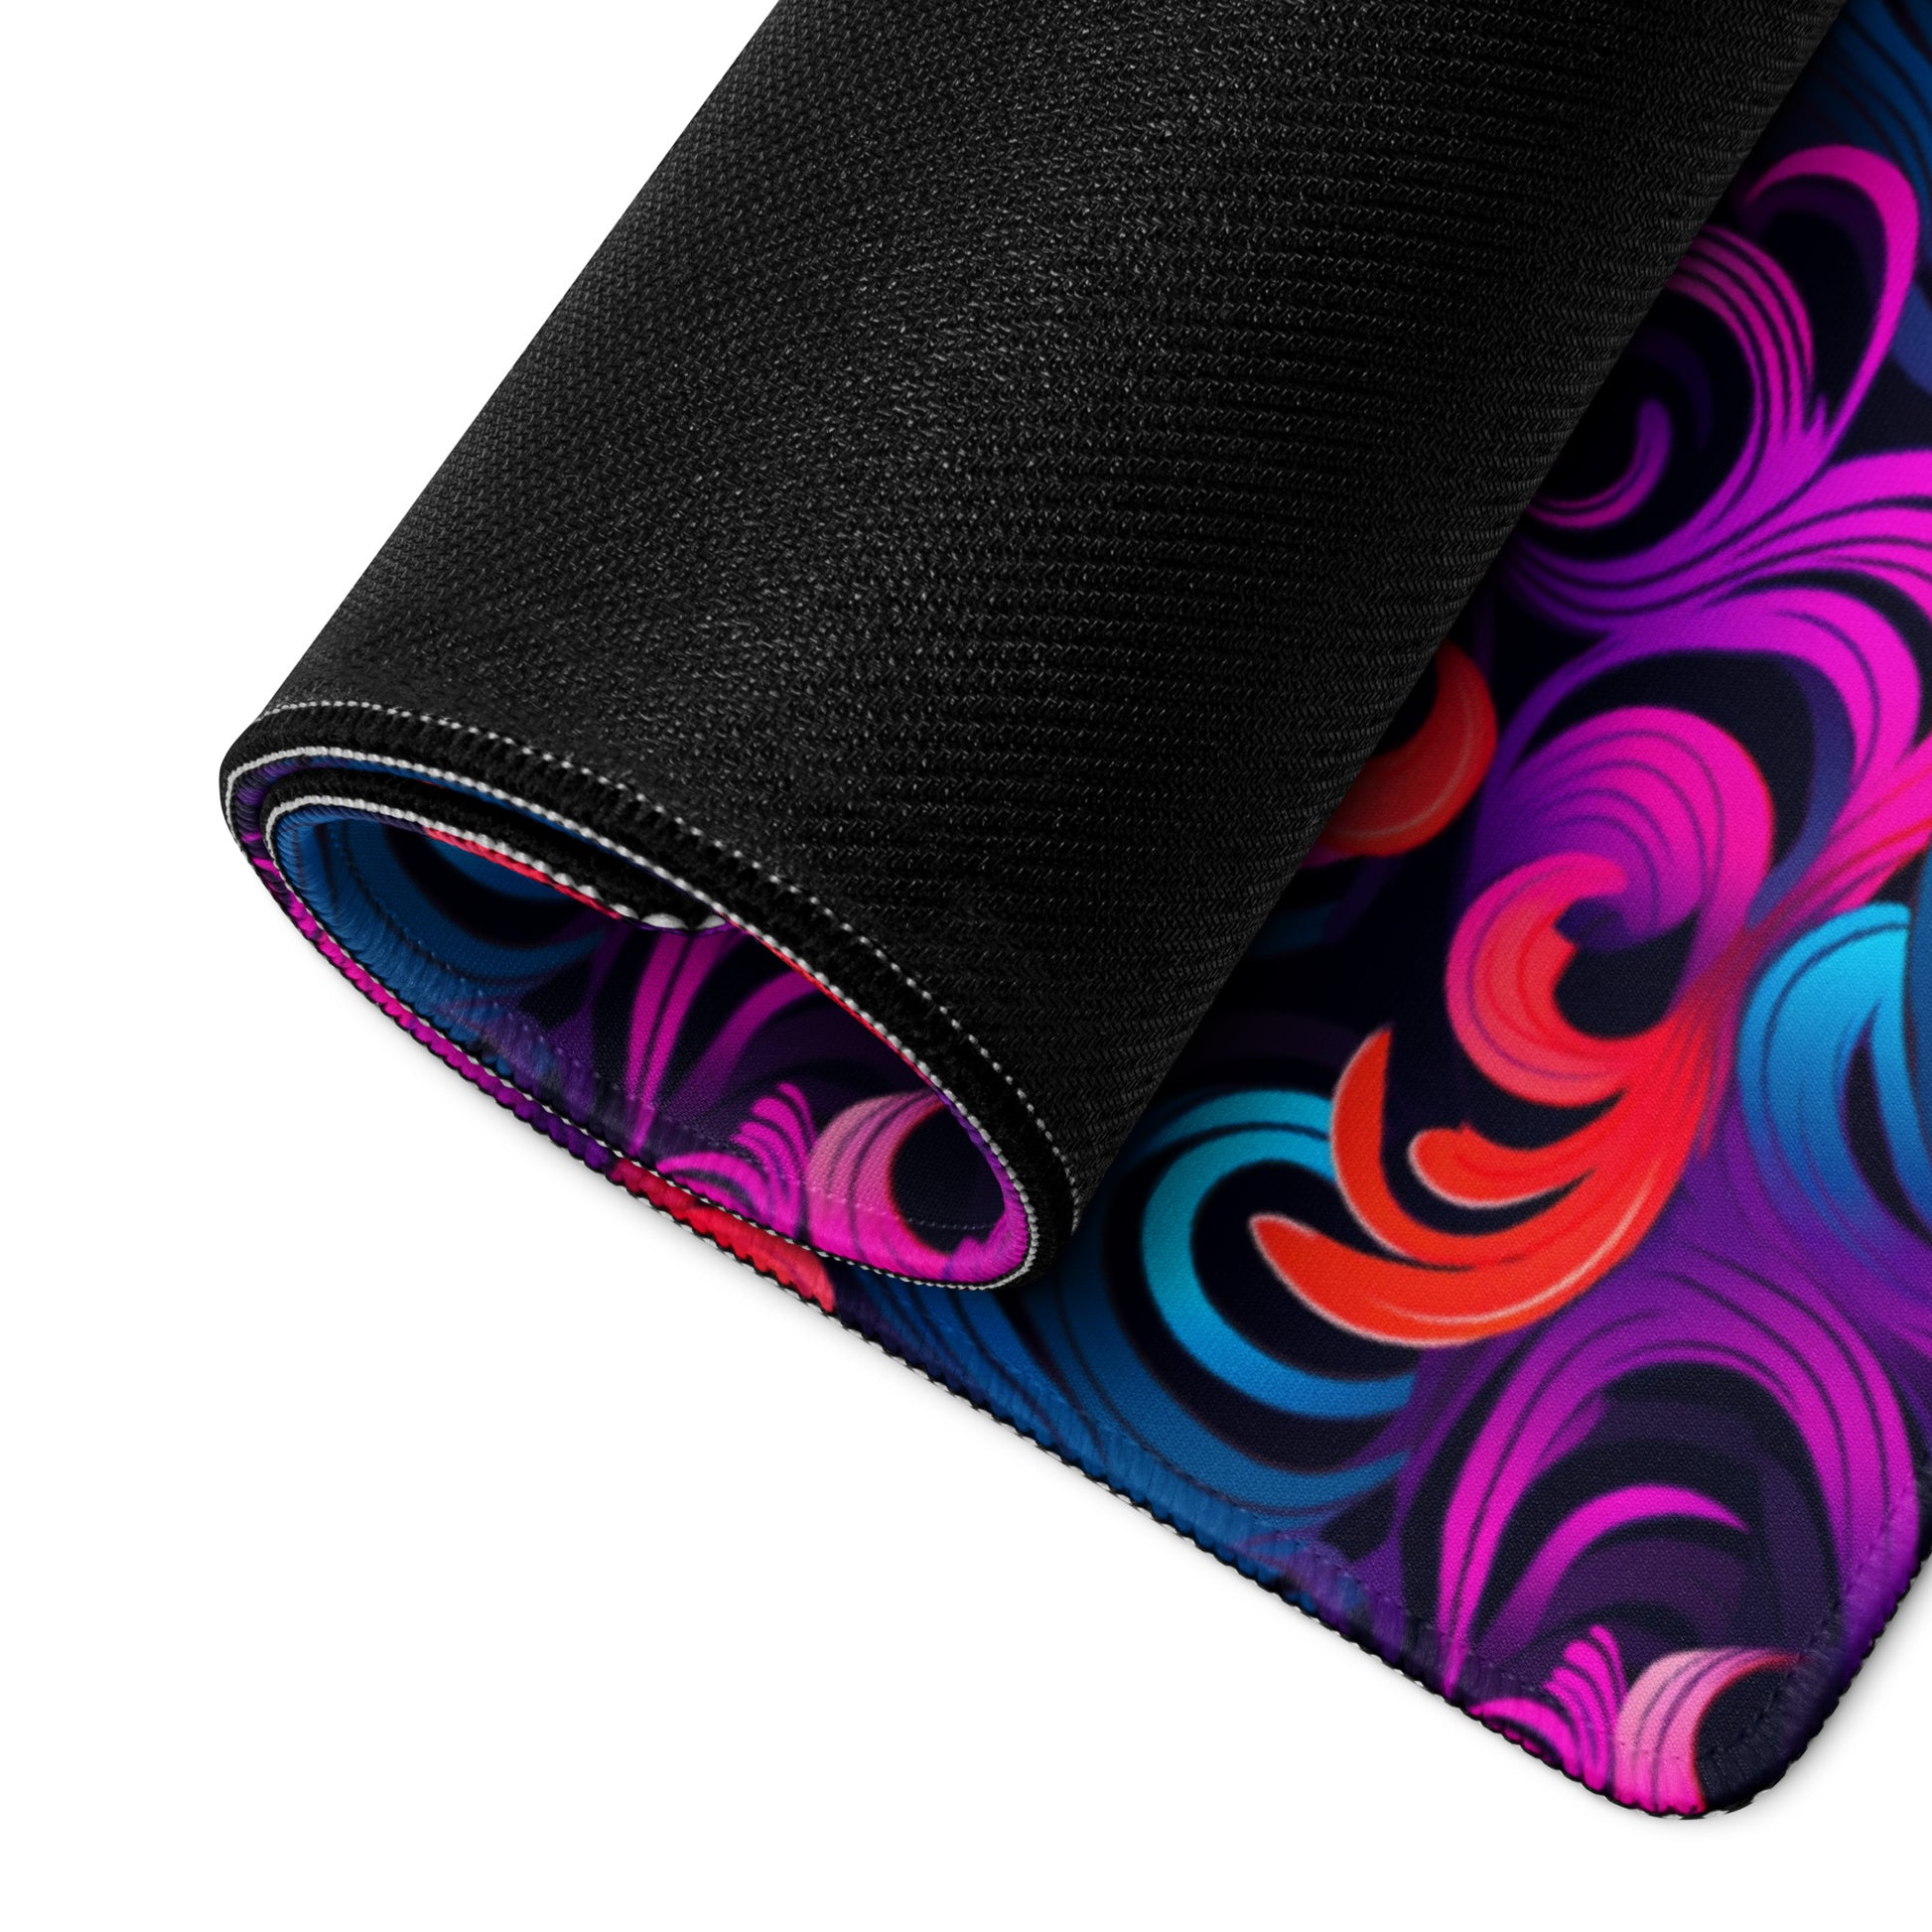 A 36" x 18" desk pad with a bright floral pattern all over it rolled up. Blue, Purple and Red in color.